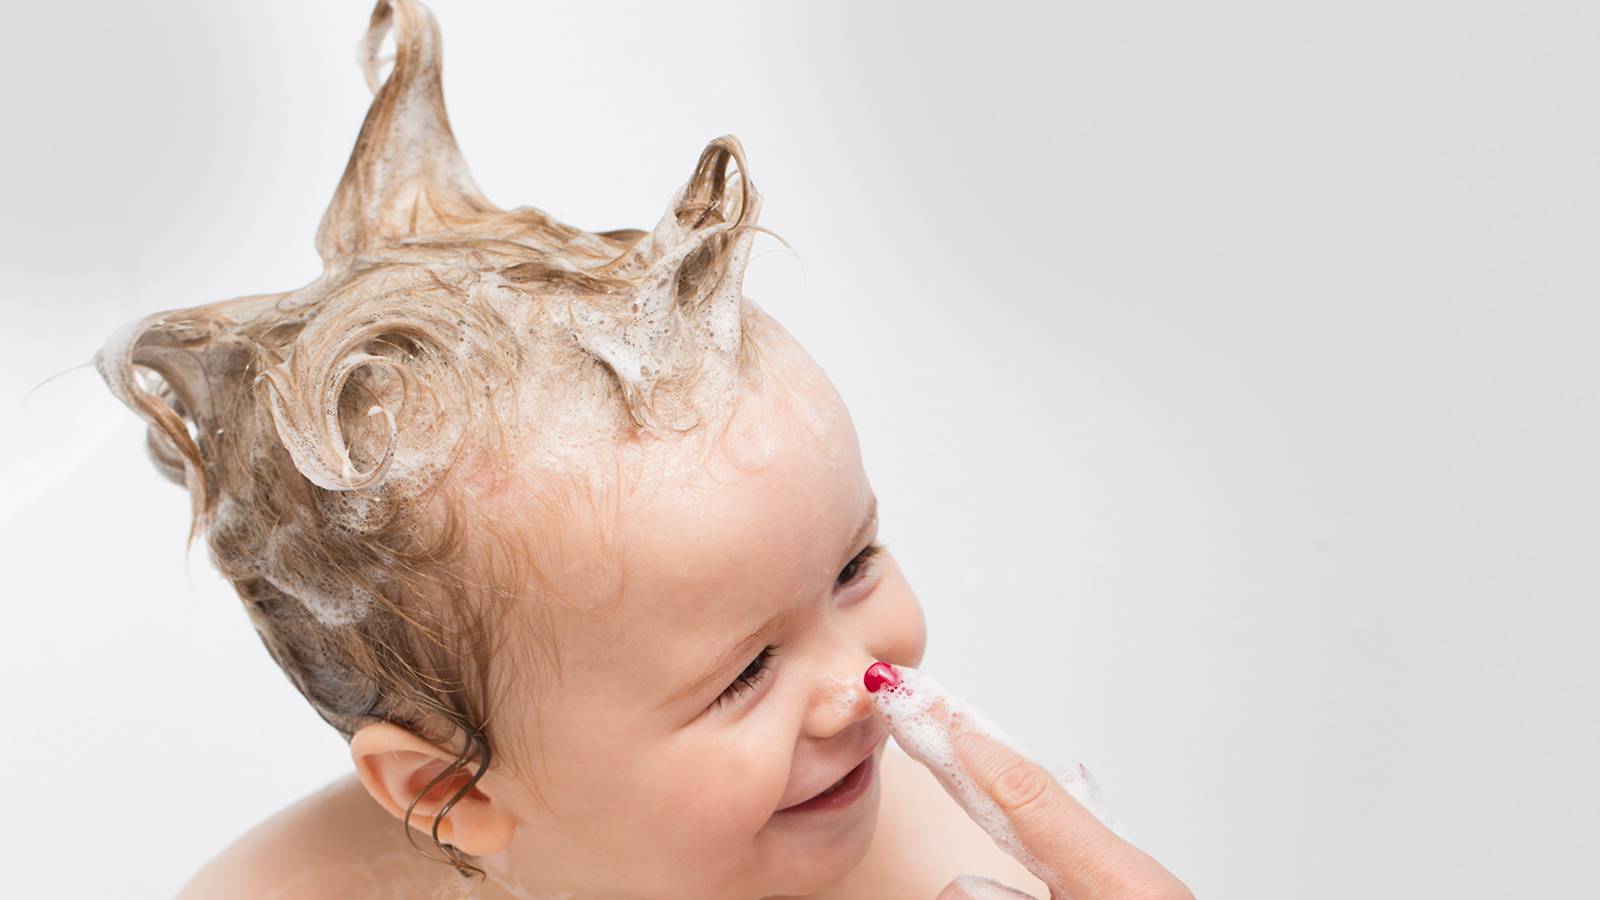 Making your baby's hair grow faster, quicker or thicker